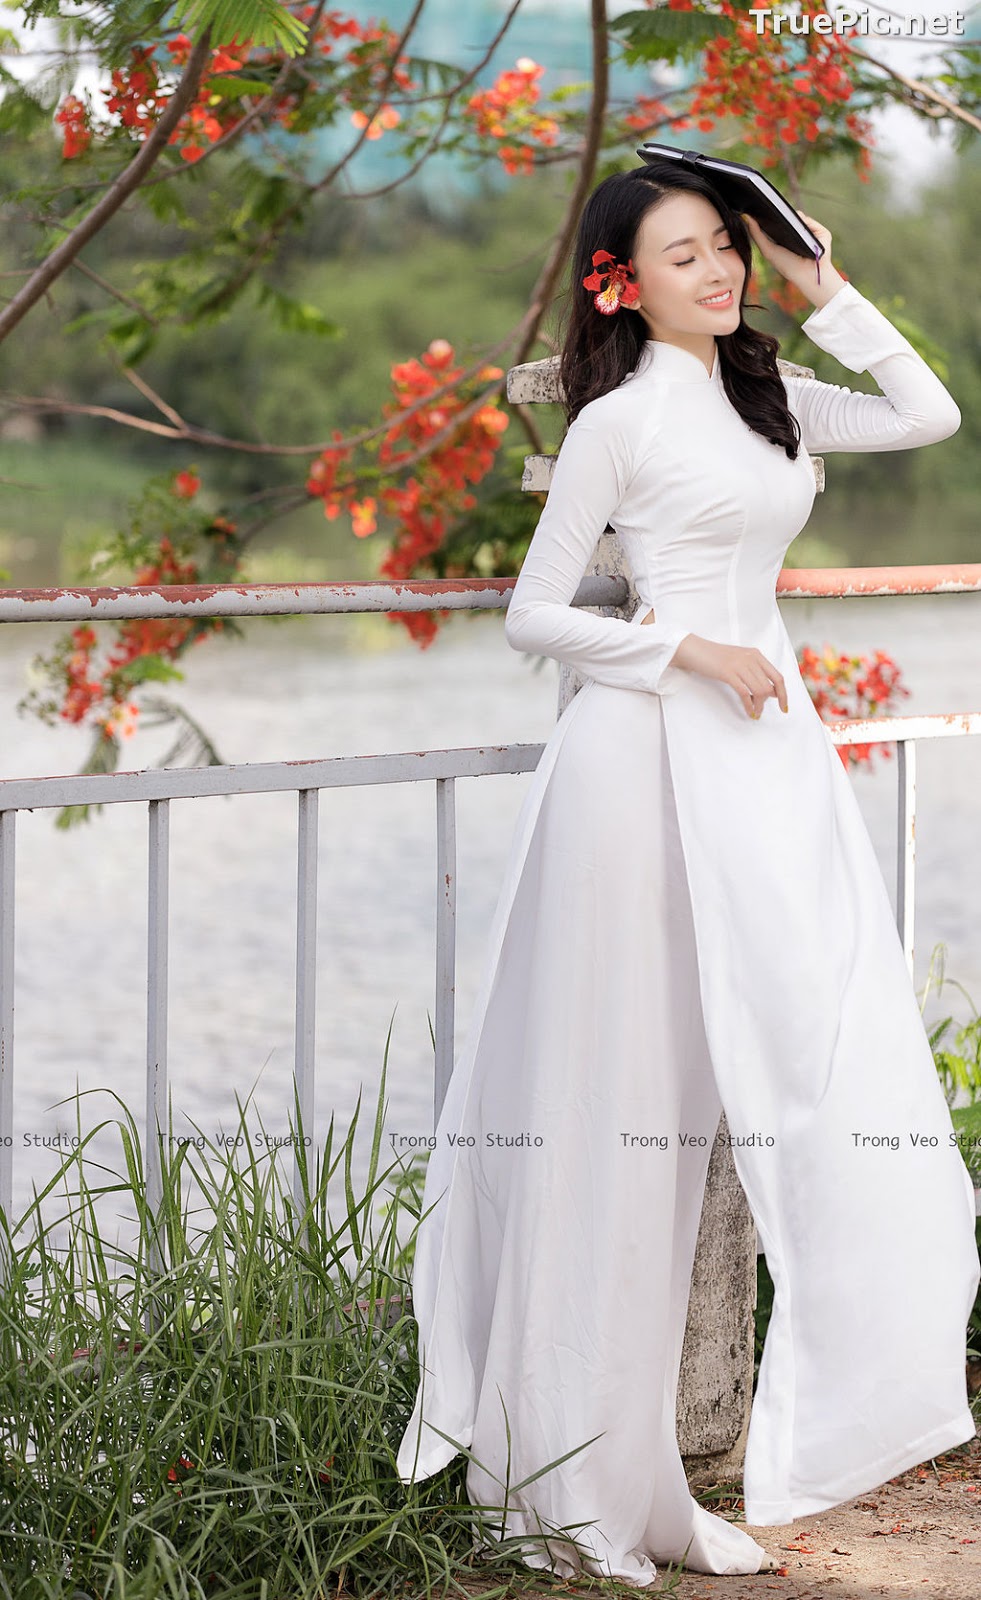 Image The Beauty of Vietnamese Girls with Traditional Dress (Ao Dai) #3 - TruePic.net - Picture-38